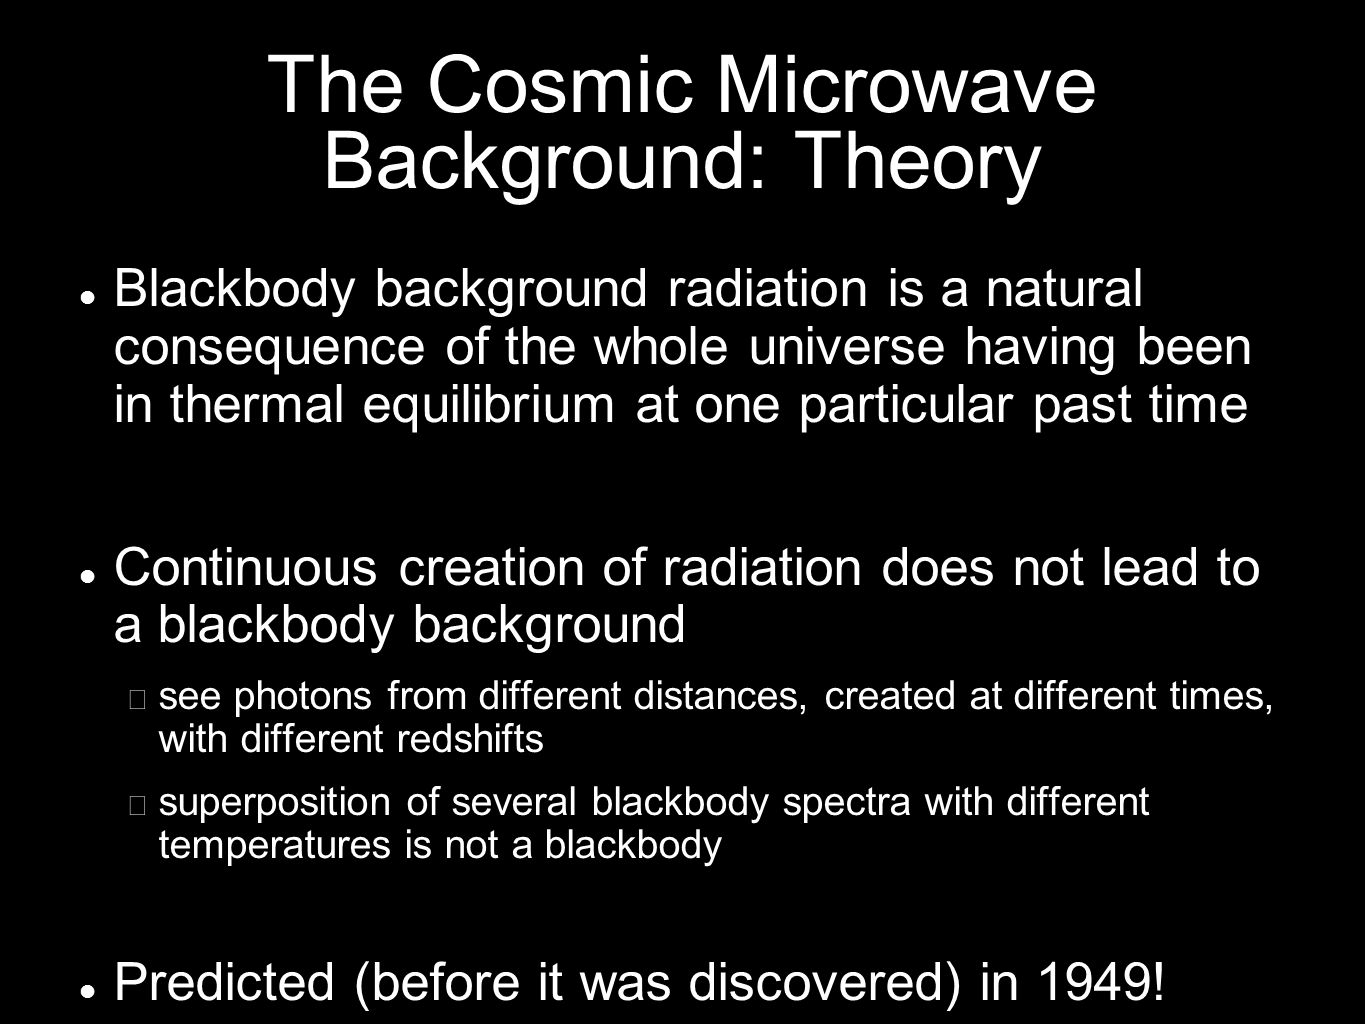 The Cosmic Microwave Background: Theory Blackbody background radiation is a natural consequence of the whole universe having been in thermal equilibrium at one particular past time Continuous creation of radiation does not lead to a blackbody background − see photons from different distances, created at different times, with different redshifts − superposition of several blackbody spectra with different temperatures is not a blackbody Predicted (before it was discovered) in 1949!